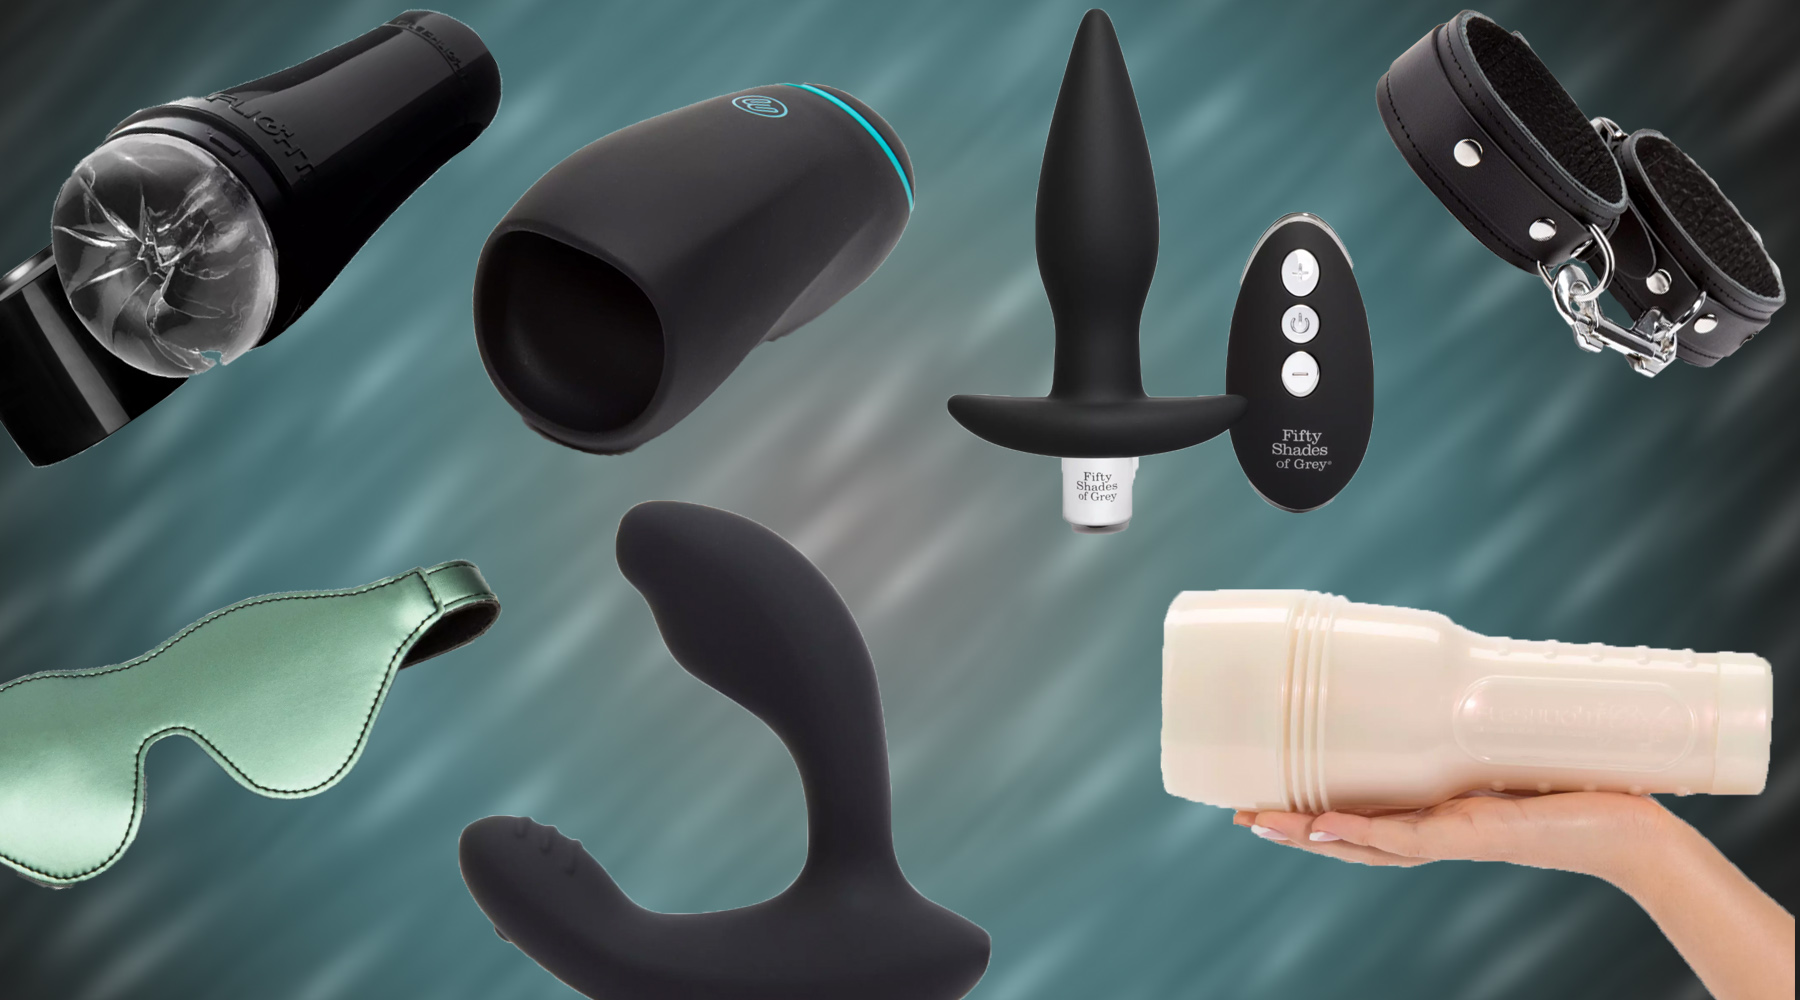 Fleshlights, BDSM Gear, and More Are On Sale at Lovehoney Right